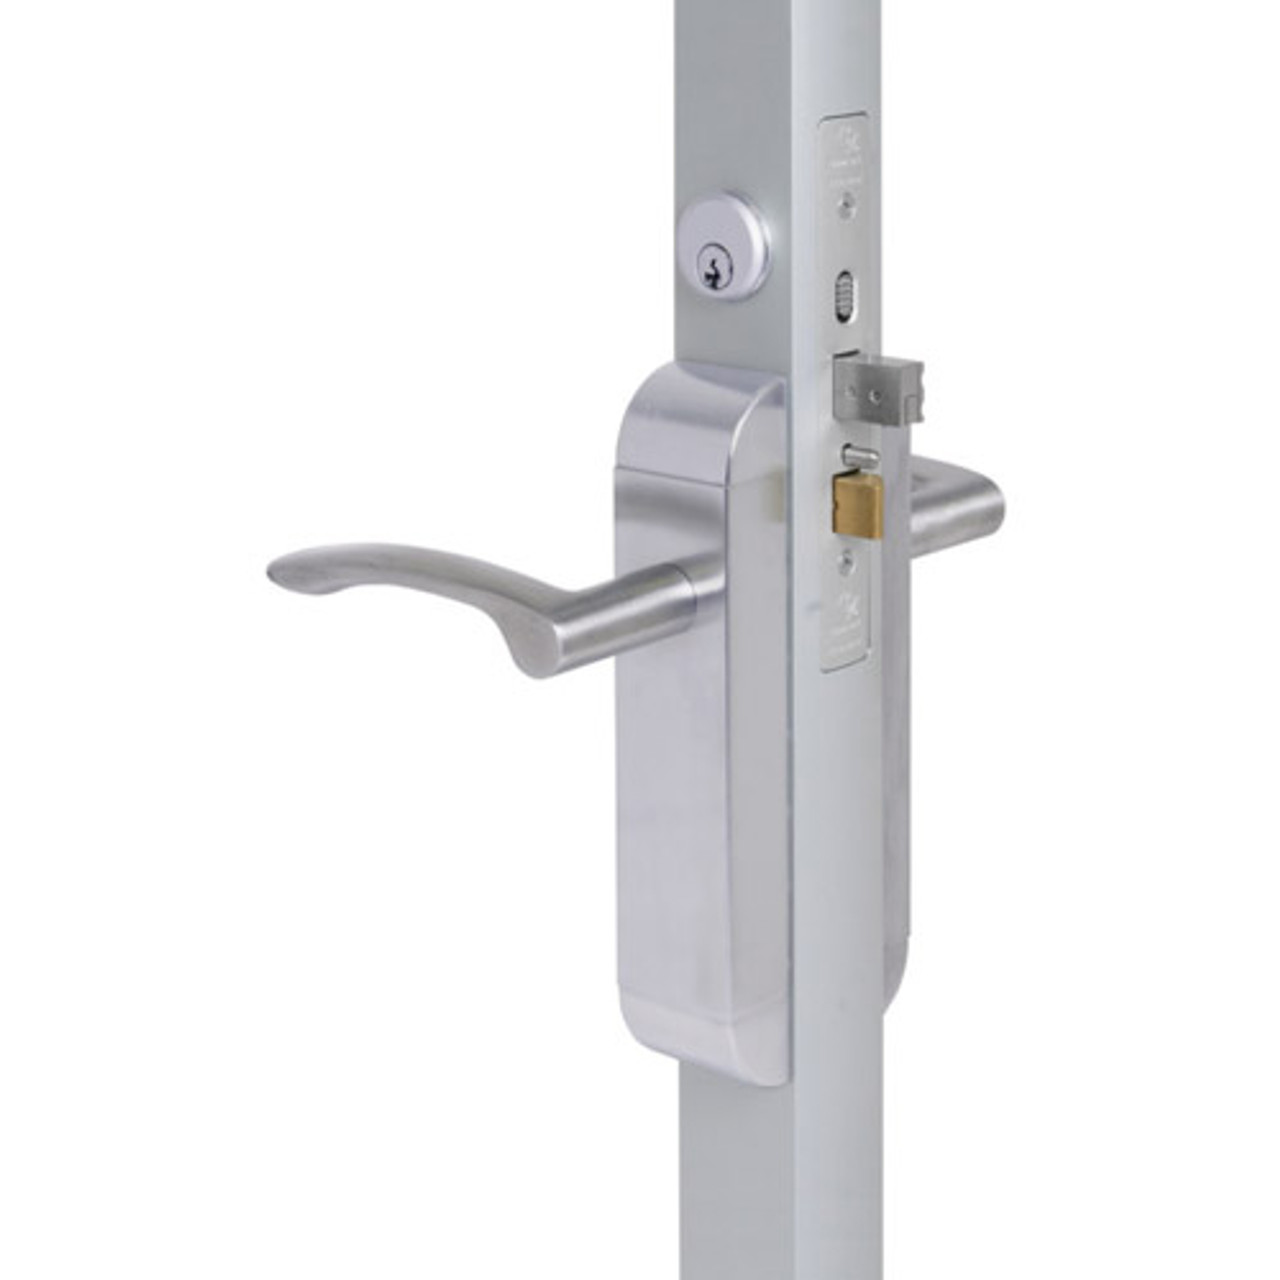 2190-411-302-32 Adams Rite Dual Force Interconnected 2190 series Deadlock/Deadlatch in Bright Stainless